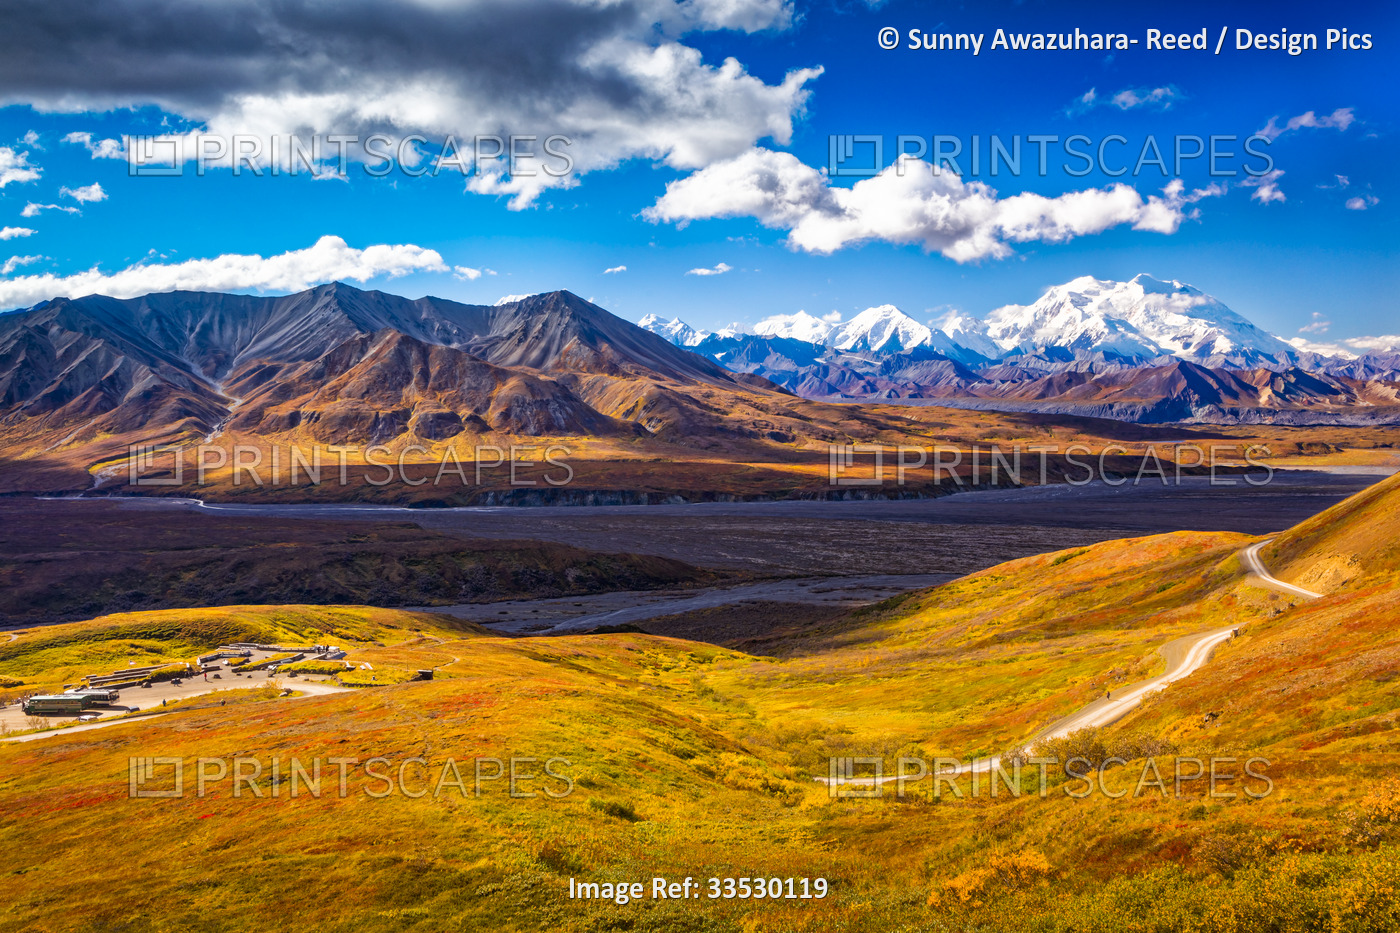 View of Mount Denali (McKinley), Mount Eielson and Eielson Visitor Center with ...